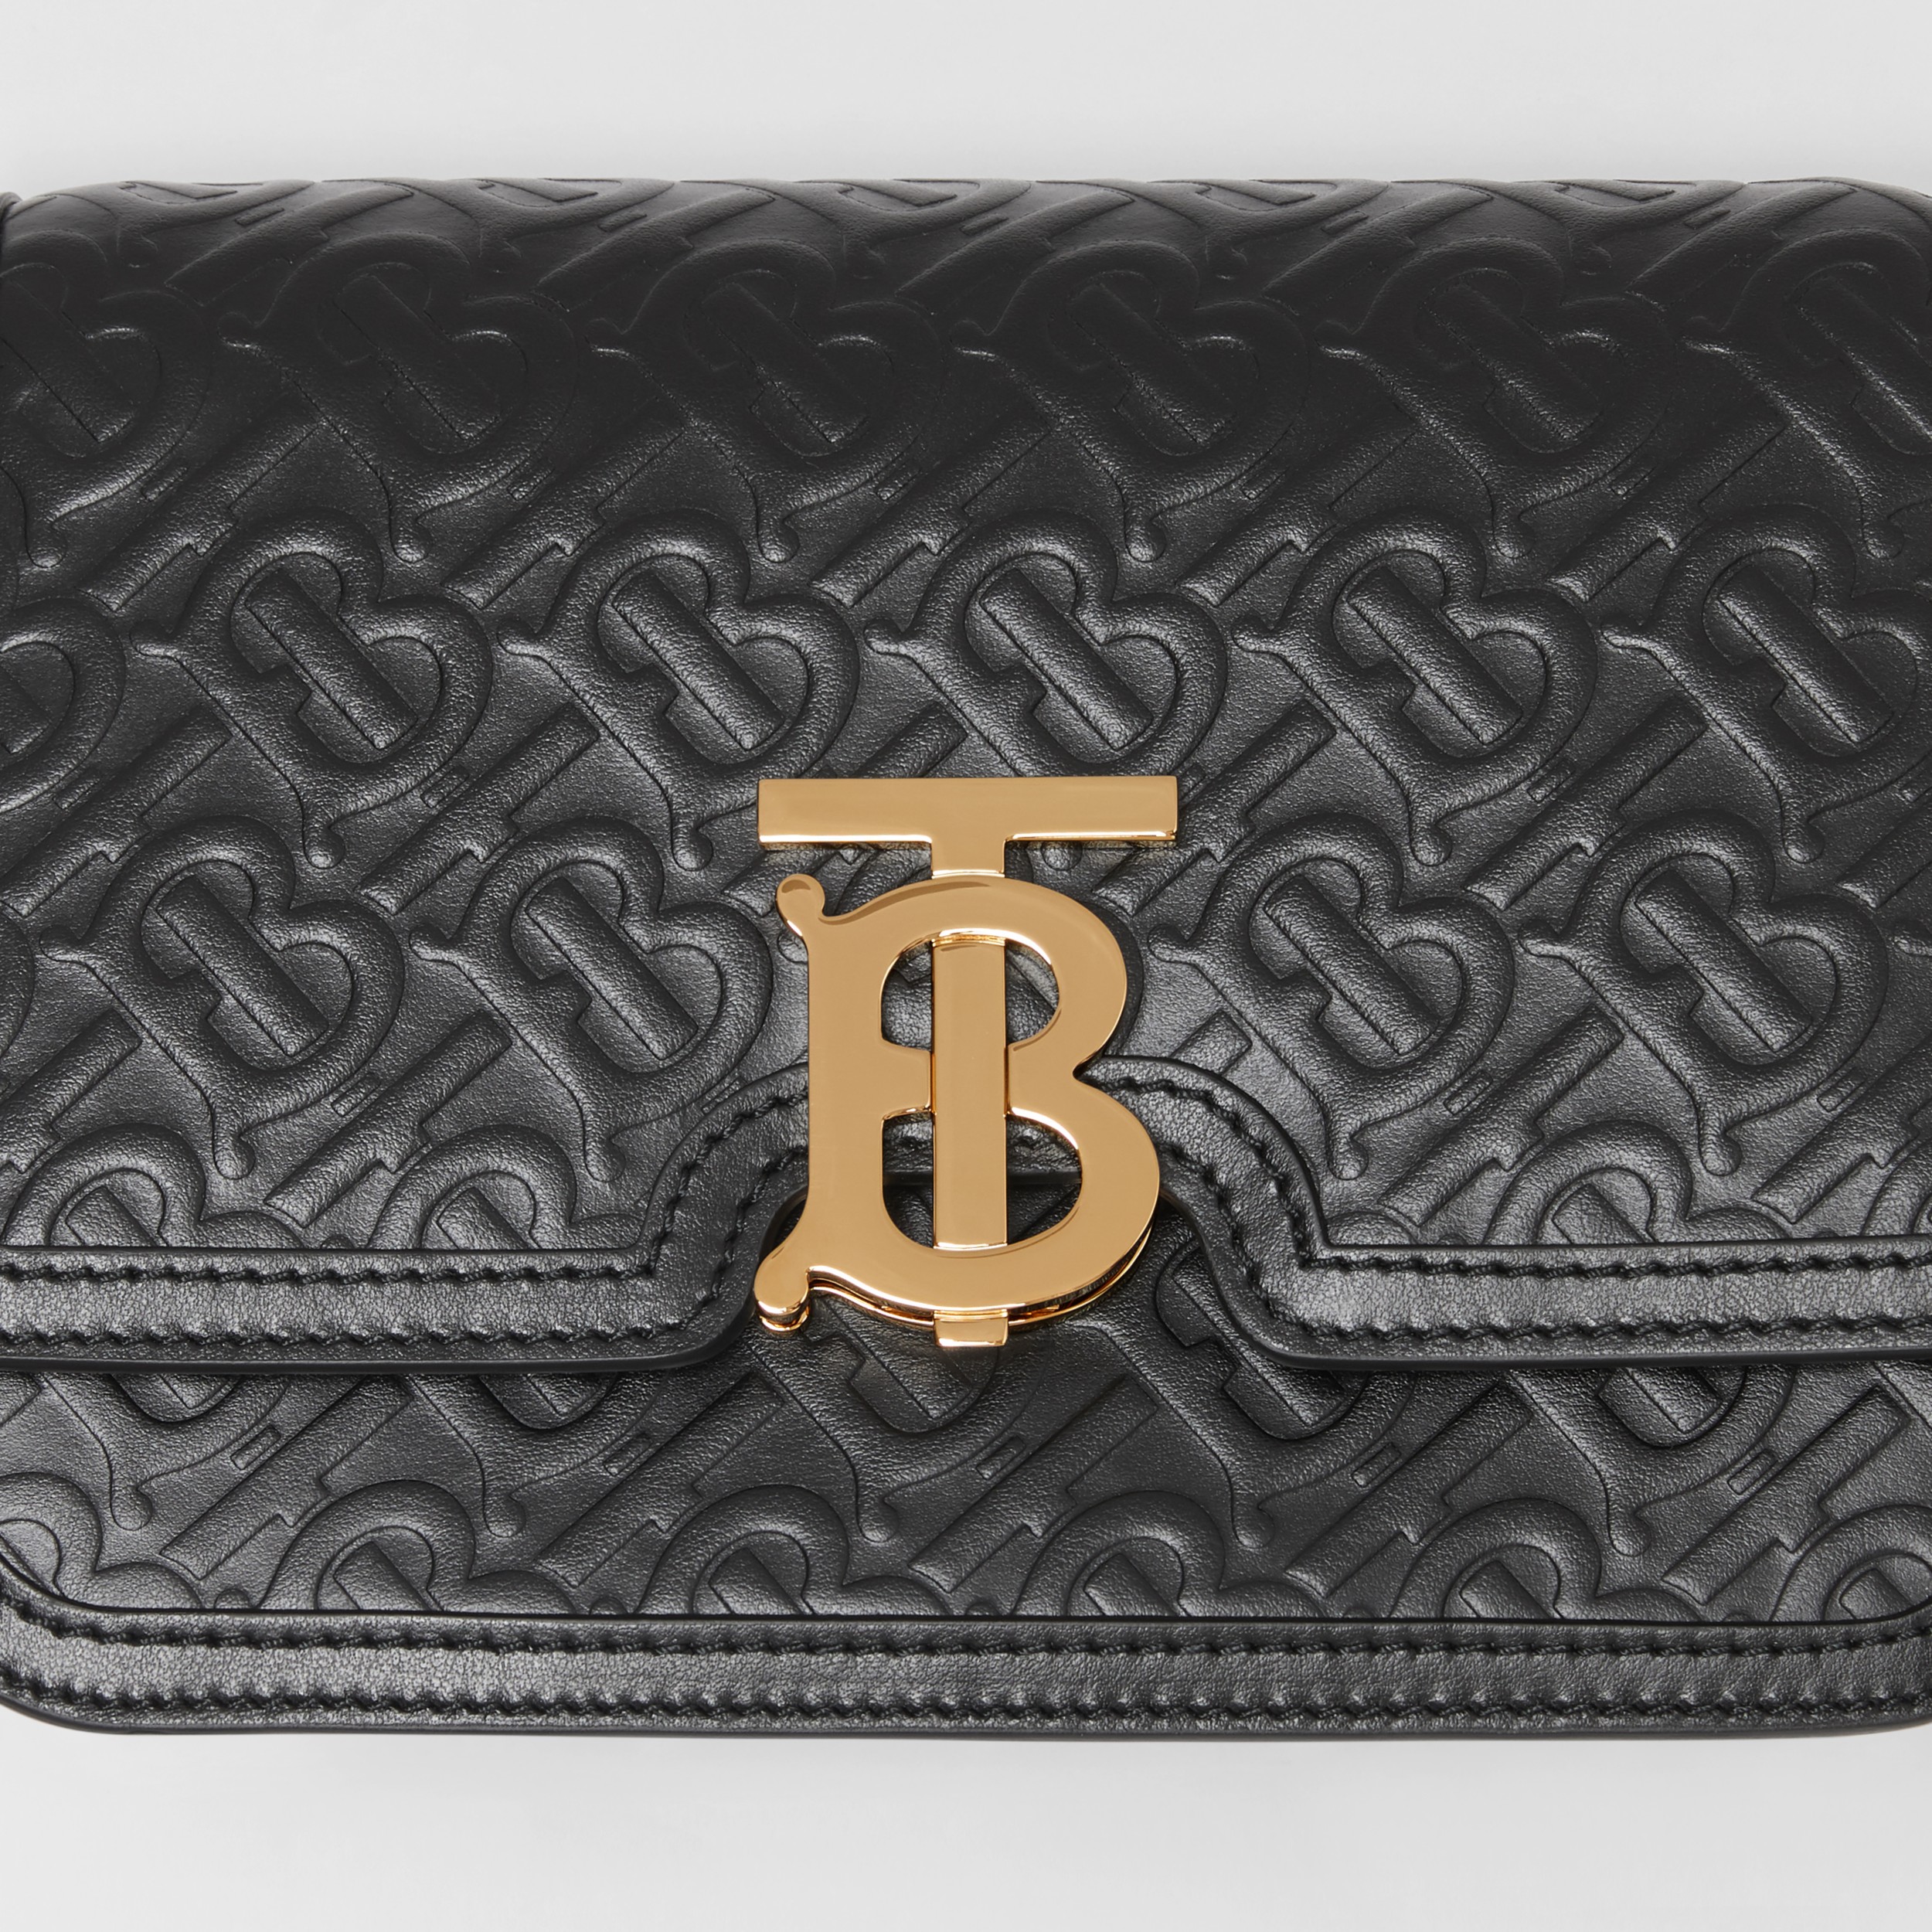 Small Monogram Leather TB Bag in Black - Women | Burberry